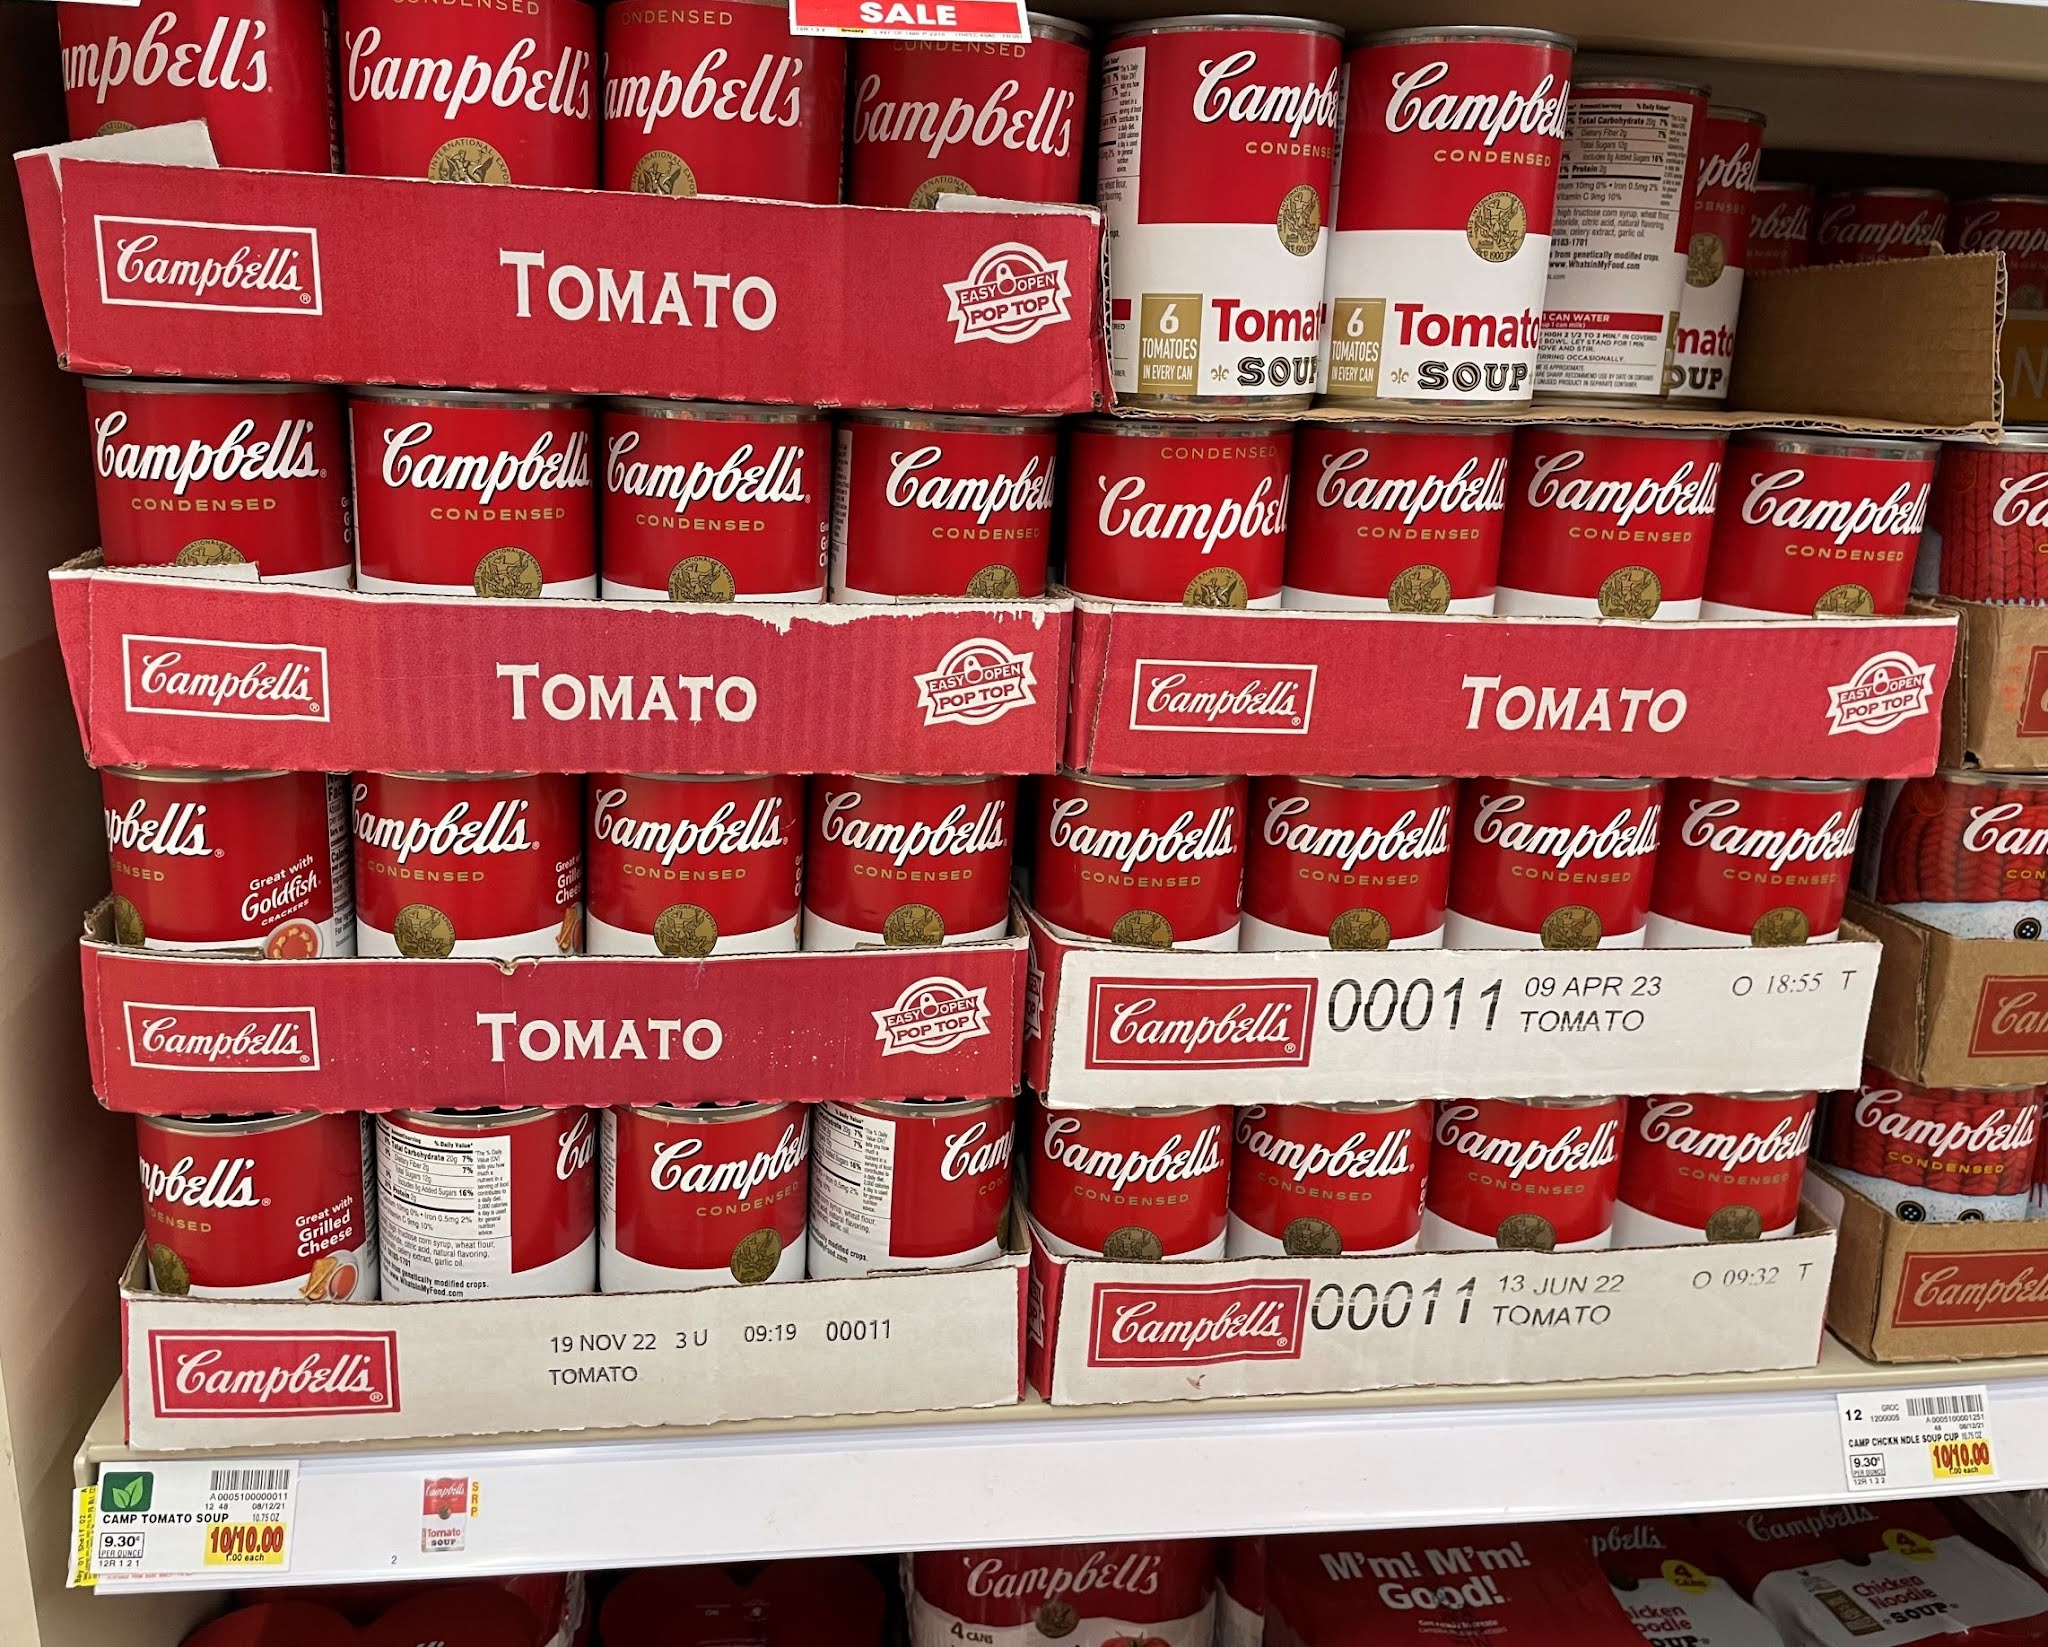 Cases of Campbell's Condensed Tomato Soup